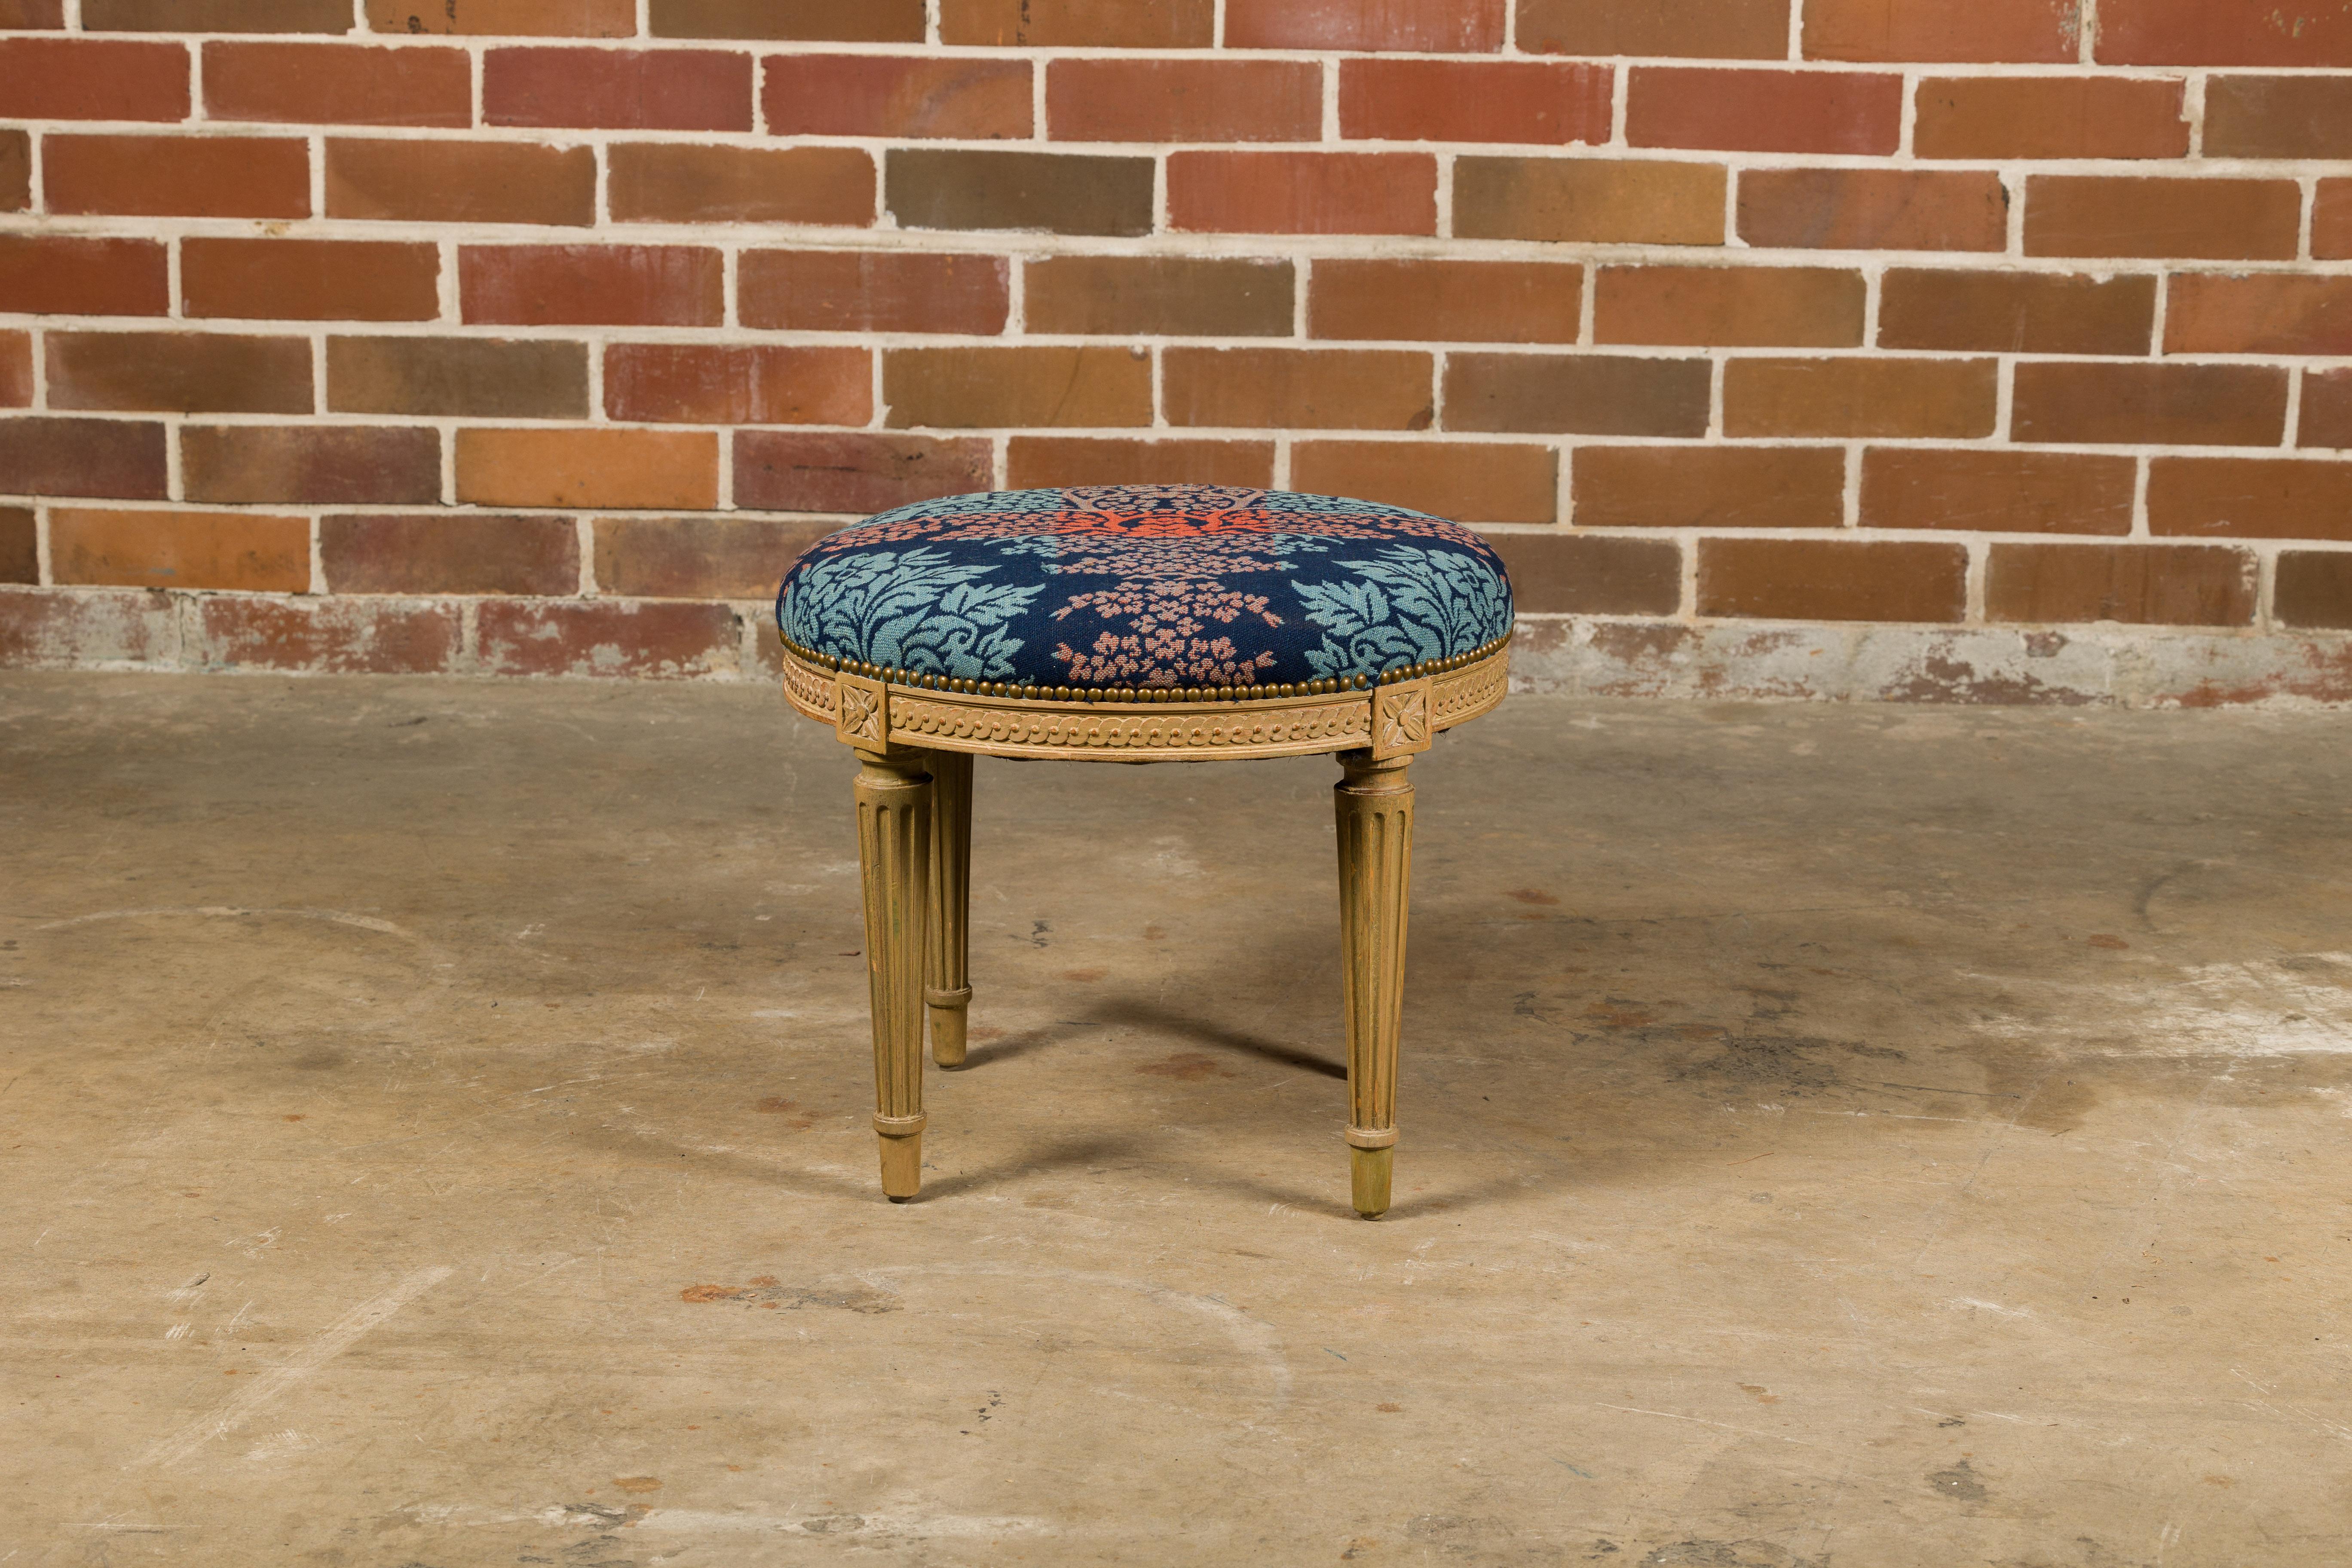 A French Neoclassical style painted stool from circa 1920 with circular upholstered seat, guilloche carved apron and fluted legs. This French 1920s stool, with its circular upholstered seat, guilloche carved apron, and fluted legs, beautifully